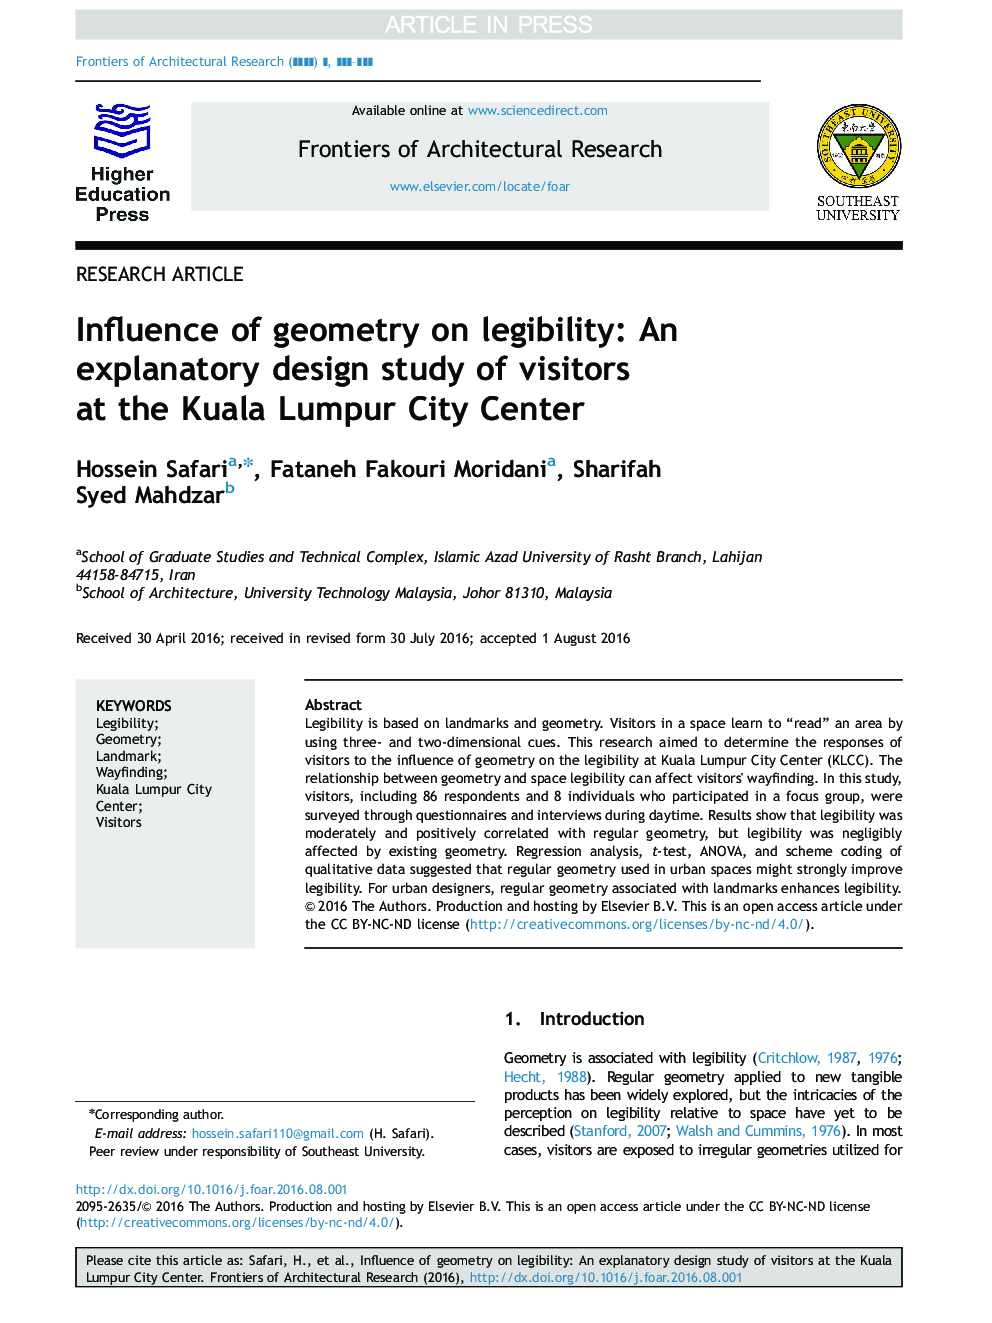 Influence of geometry on legibility: An explanatory design study of visitors at the Kuala Lumpur City Center